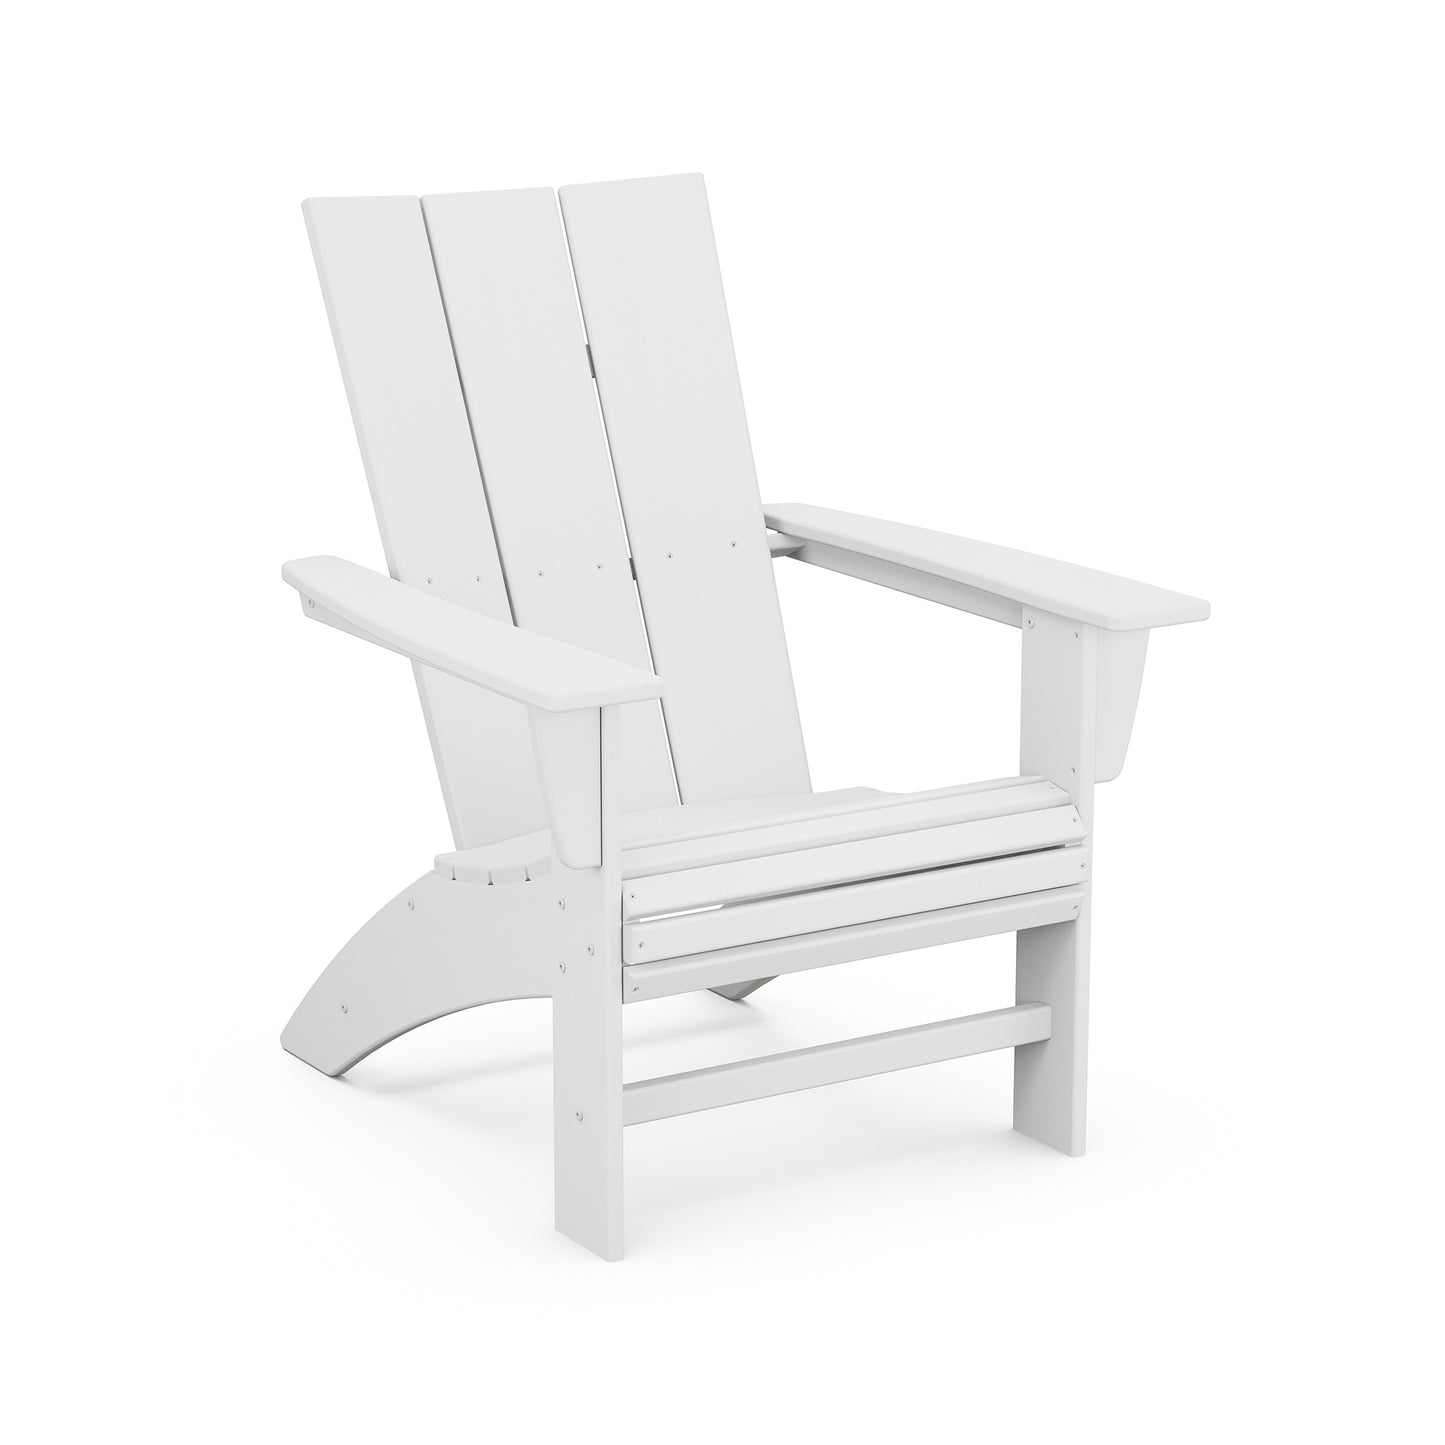 A white POLYWOOD Modern Curveback Adirondack chair featuring a tall back, wide armrests, and a slanted seat, isolated on a white background.